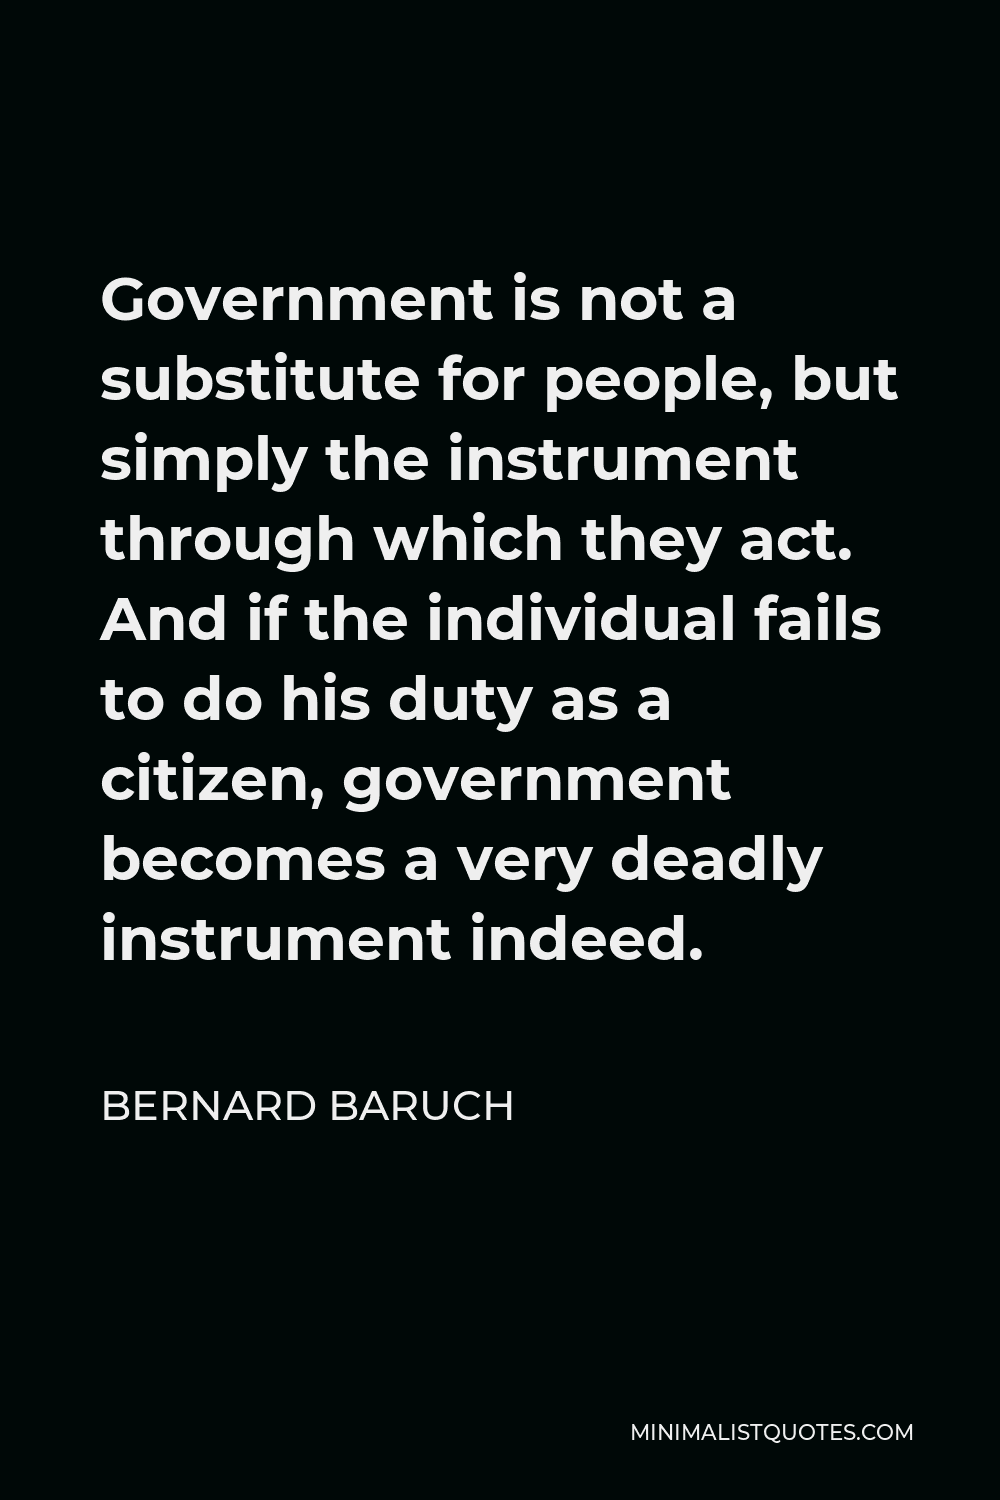 Bernard Baruch Quote - Government is not a substitute for people, but simply the instrument through which they act. And if the individual fails to do his duty as a citizen, government becomes a very deadly instrument indeed.